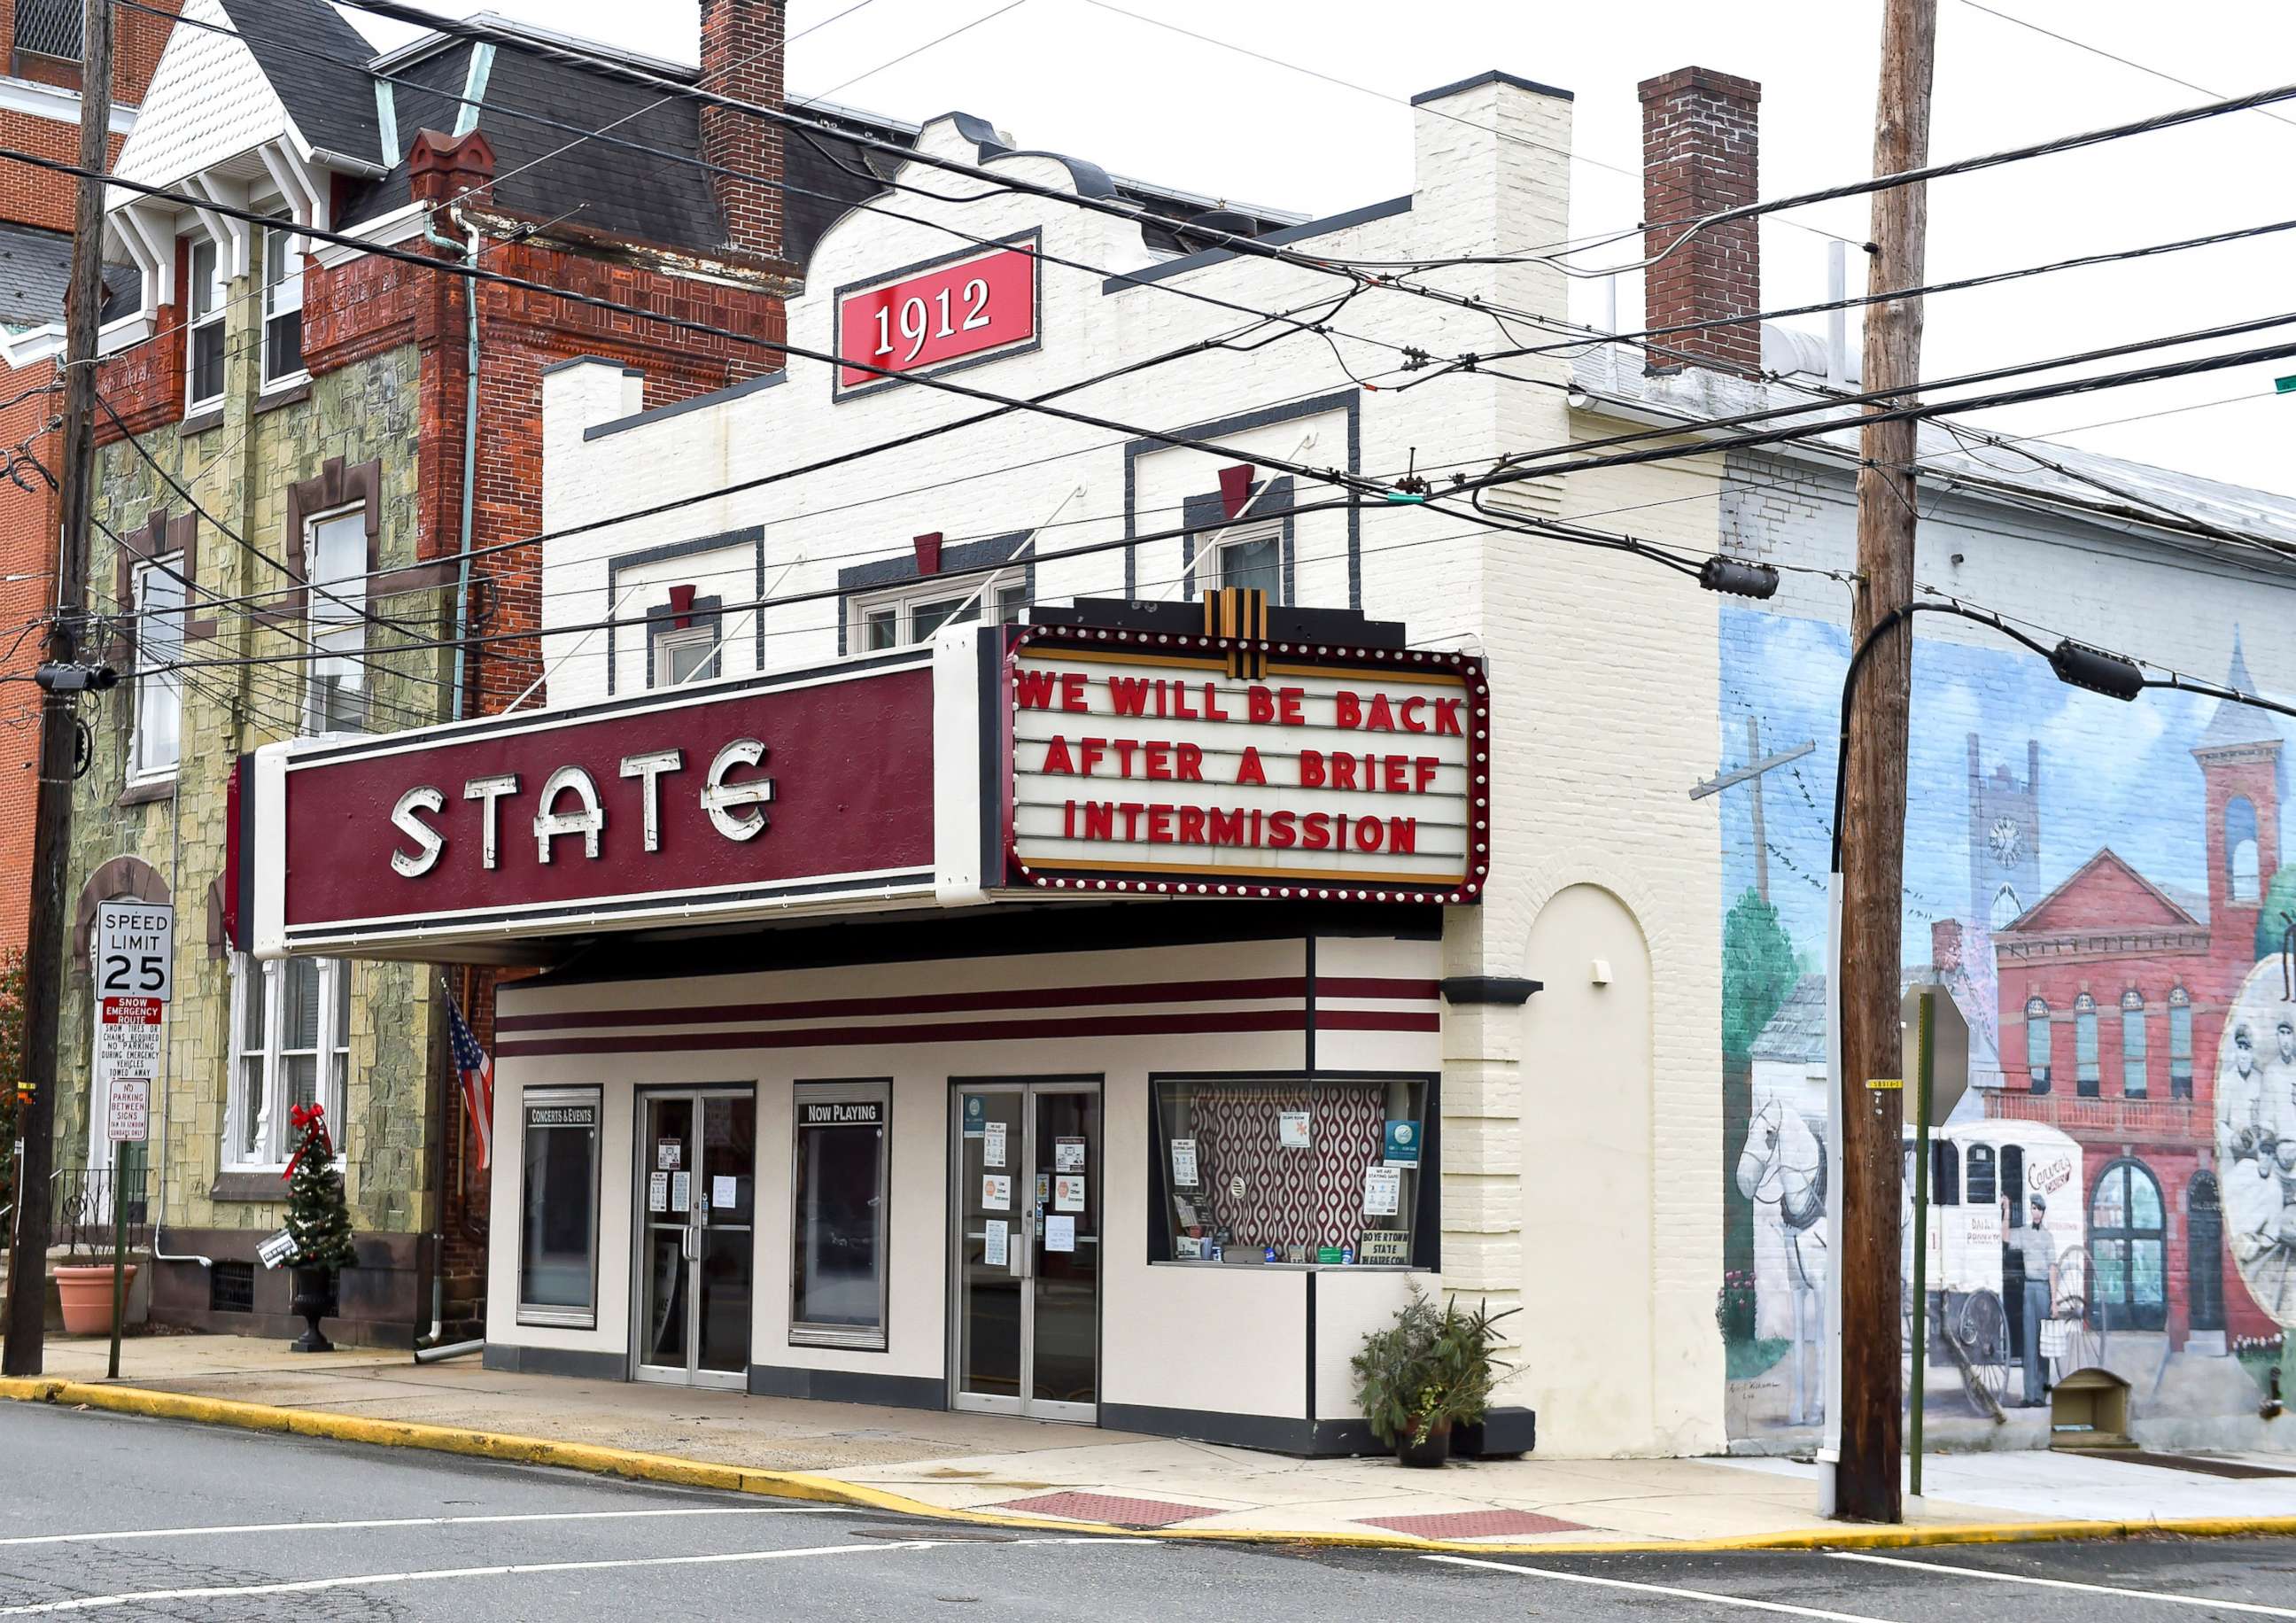 PHOTO: At the State Movie Theatre in Boyertown, Pa., Jan. 4, 2021, where they have a message on the marquee that reads "We will be back after a brief intermission."